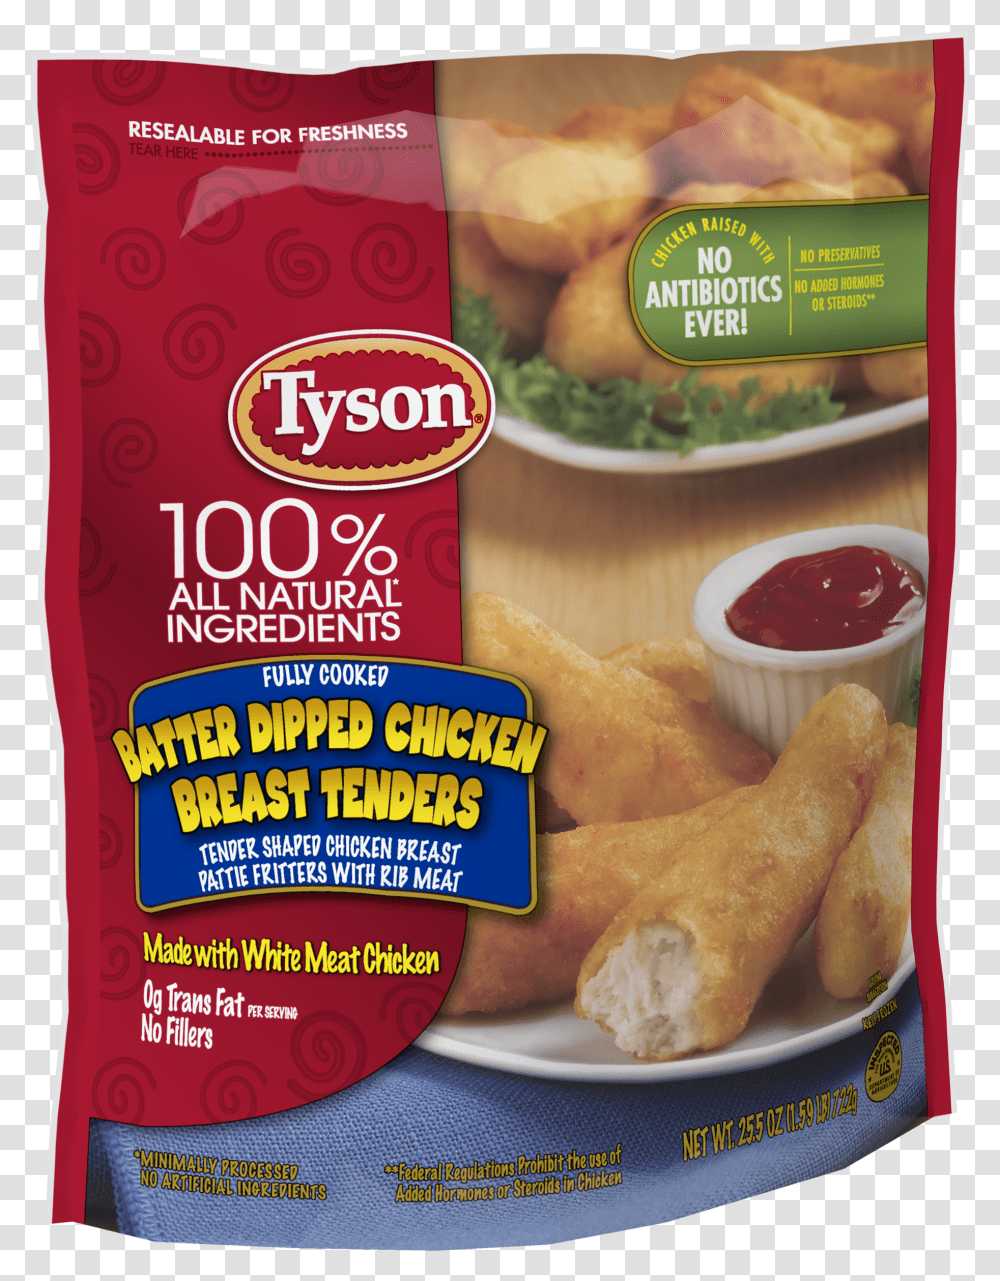 Tyson Batter Dipped Chicken Breast Tenders Transparent Png